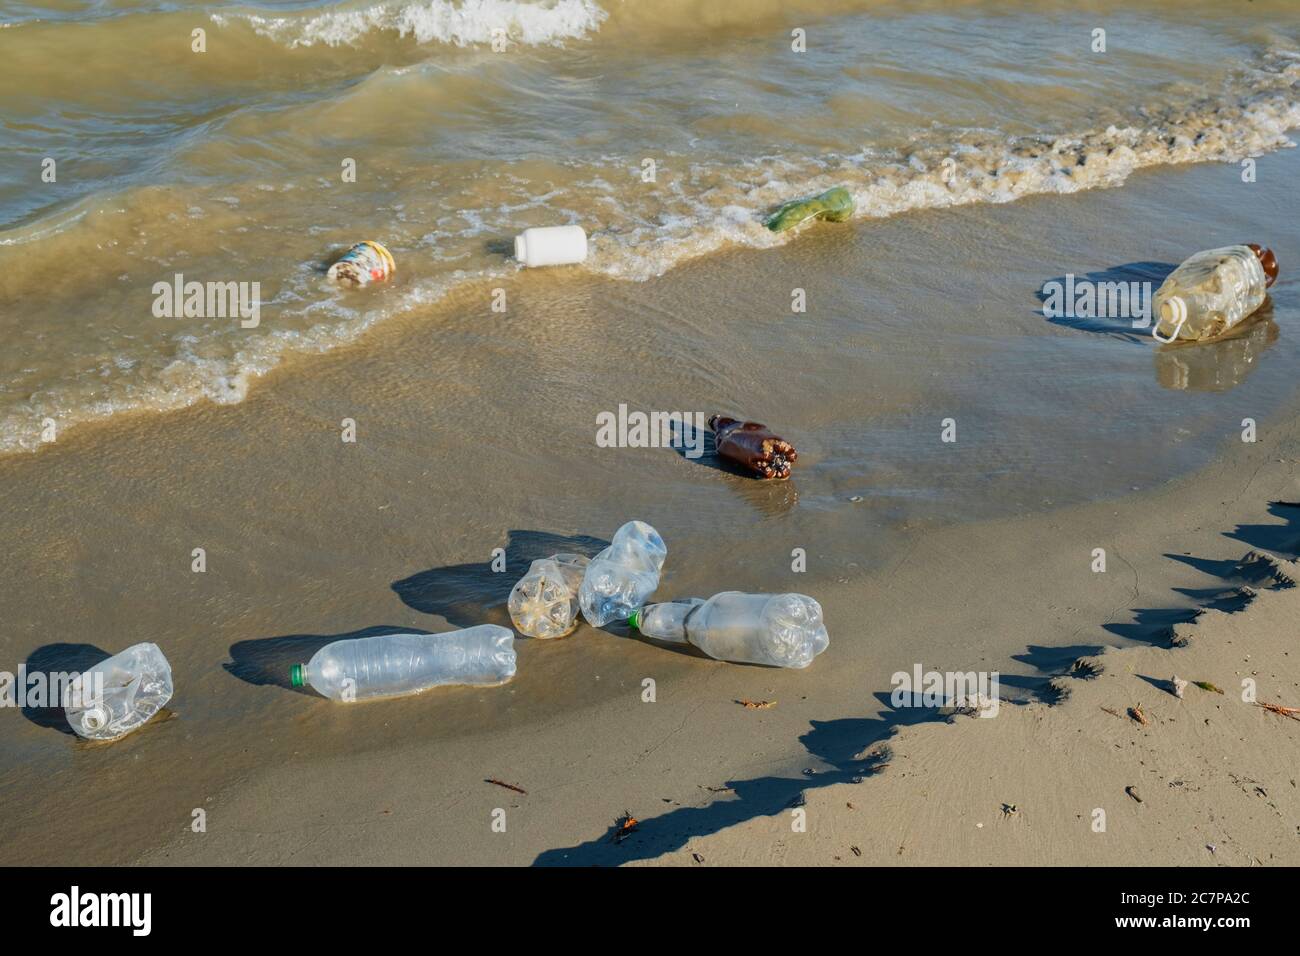 Washed by the waves ashore plastic bottles. Massive plastic pollution on the Danube river bank in Danube Biosphere Reserve. Plastic garbage environmental pollution problem. Plastic and other garbage from all over Europe is washed out by the Danube river into the Black Sea. Stock Photo